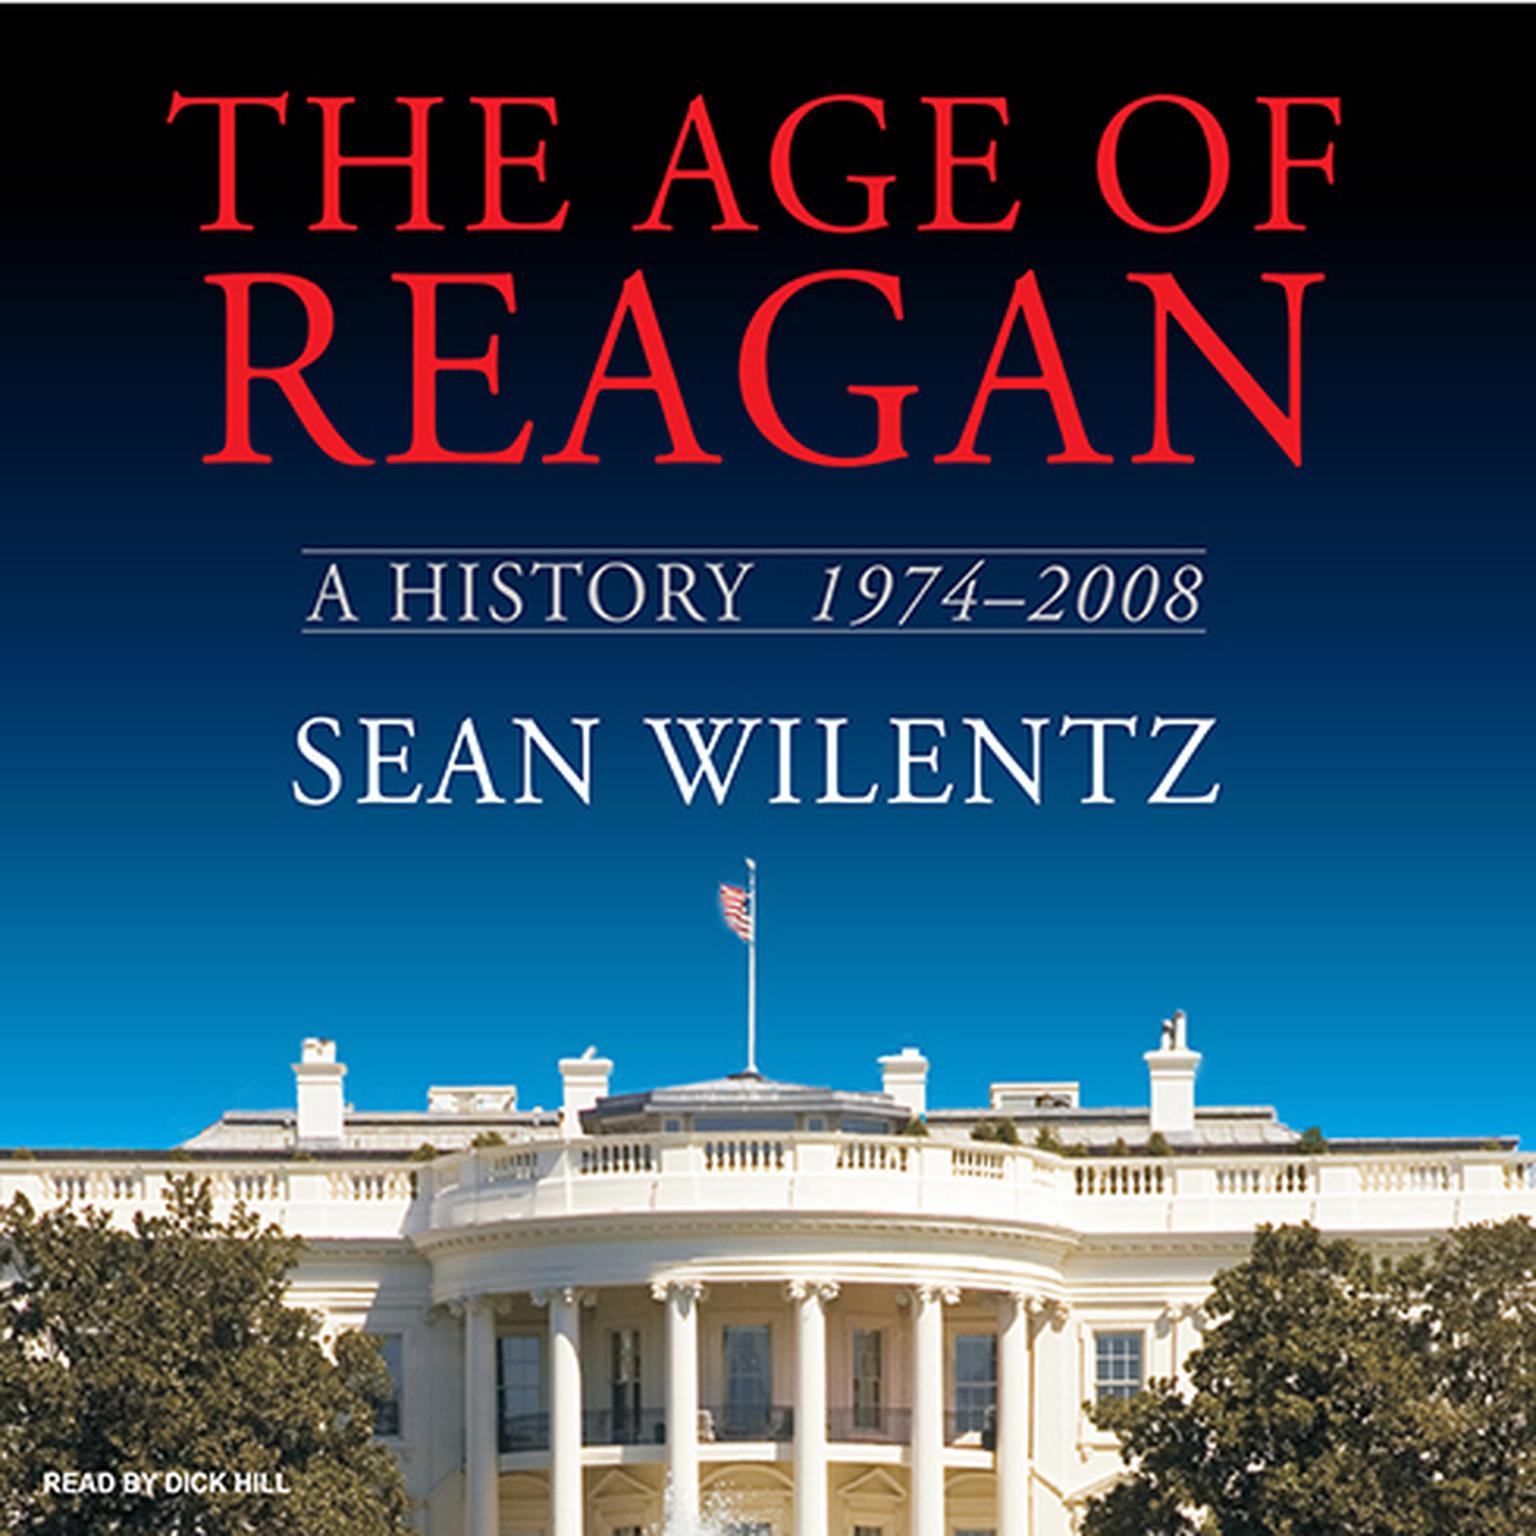 The Age of Reagan: A History, 1974-2008 Audiobook, by Sean Wilentz